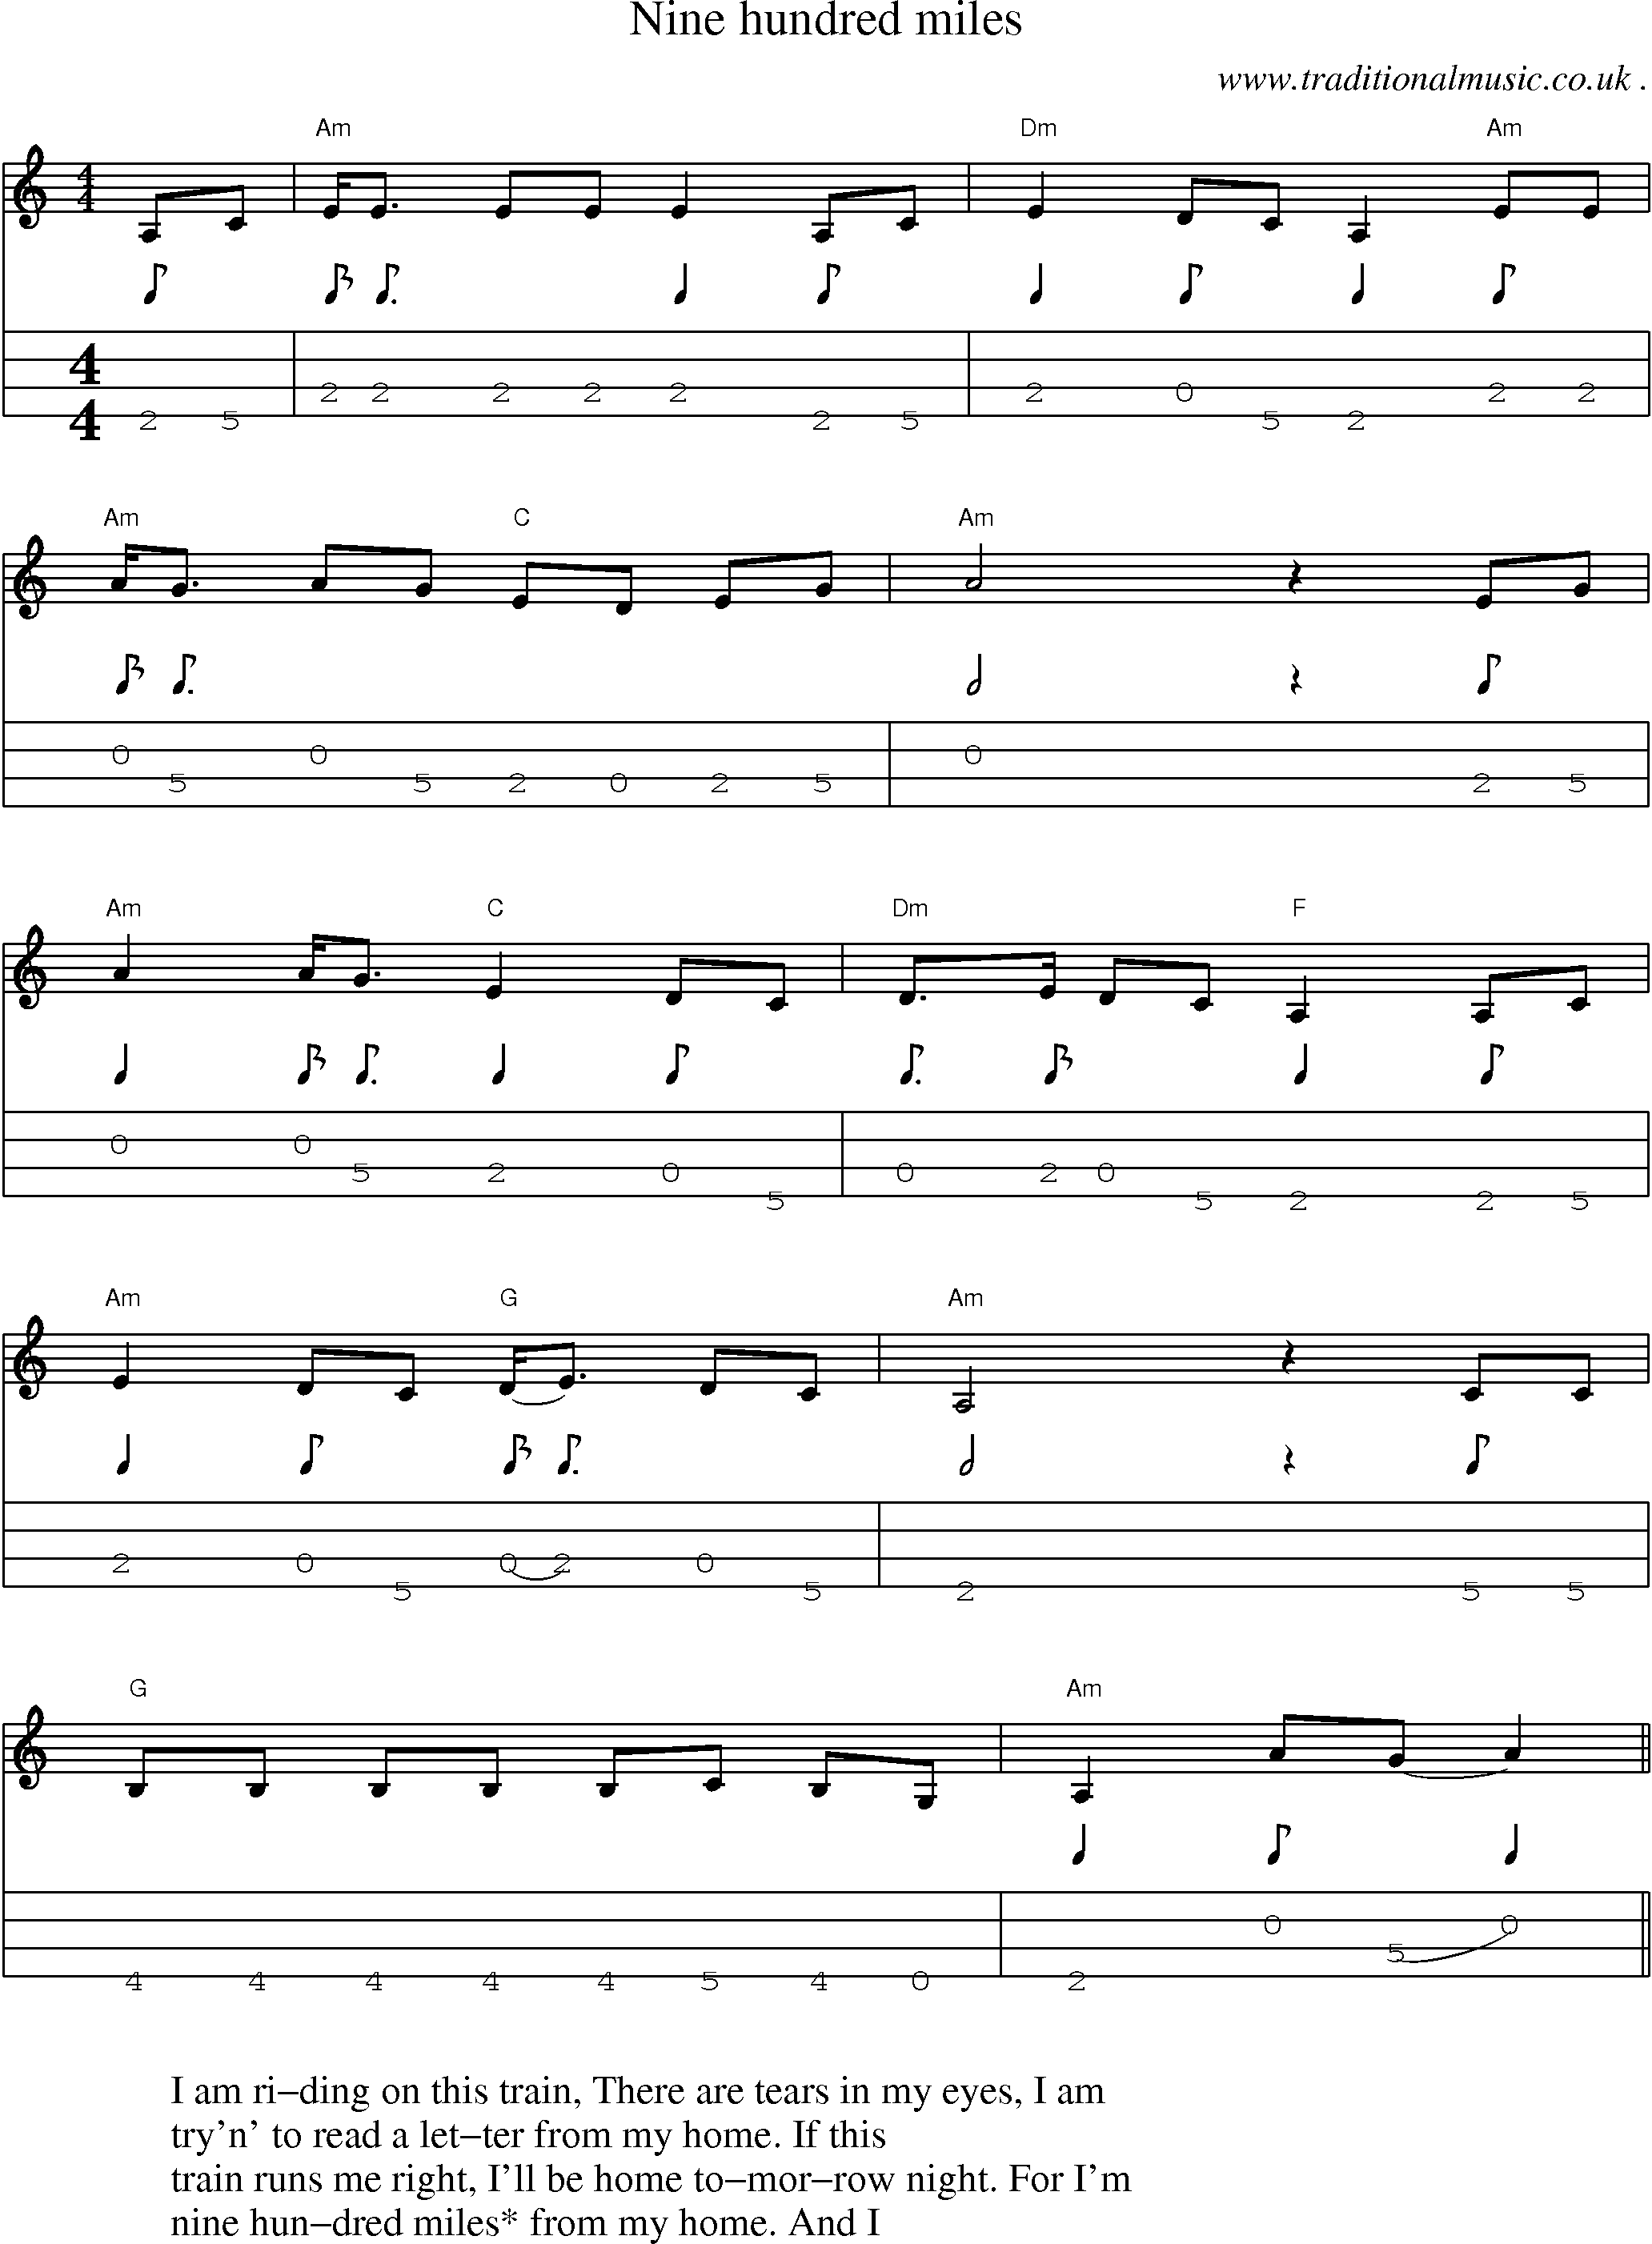 Music Score and Guitar Tabs for Nine Hundred Miles